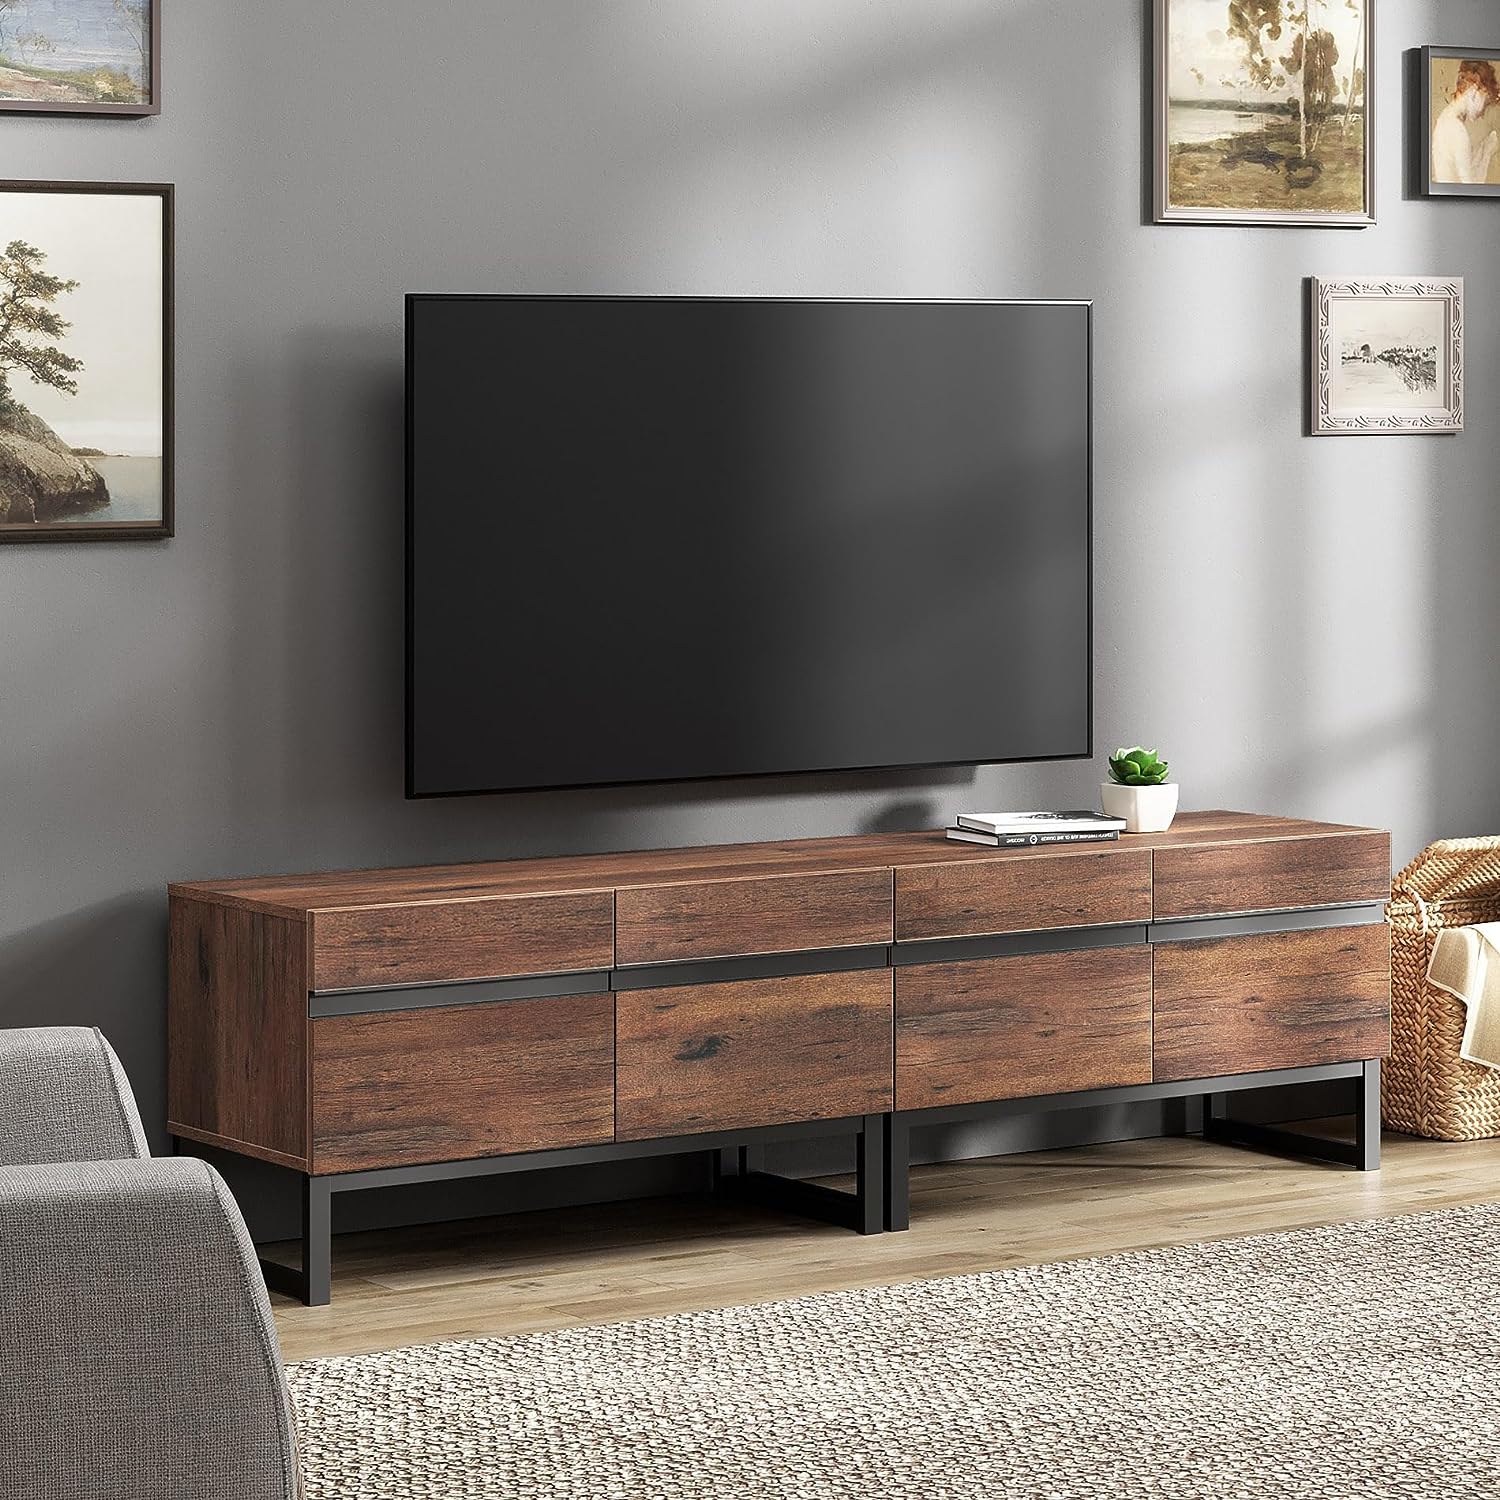 WAMPAT Modern TV Stand for TVs up to 110 inch, 3 in 1 Entertainment Center TV Console with Storage Space, Media Console for Living Room, Brown